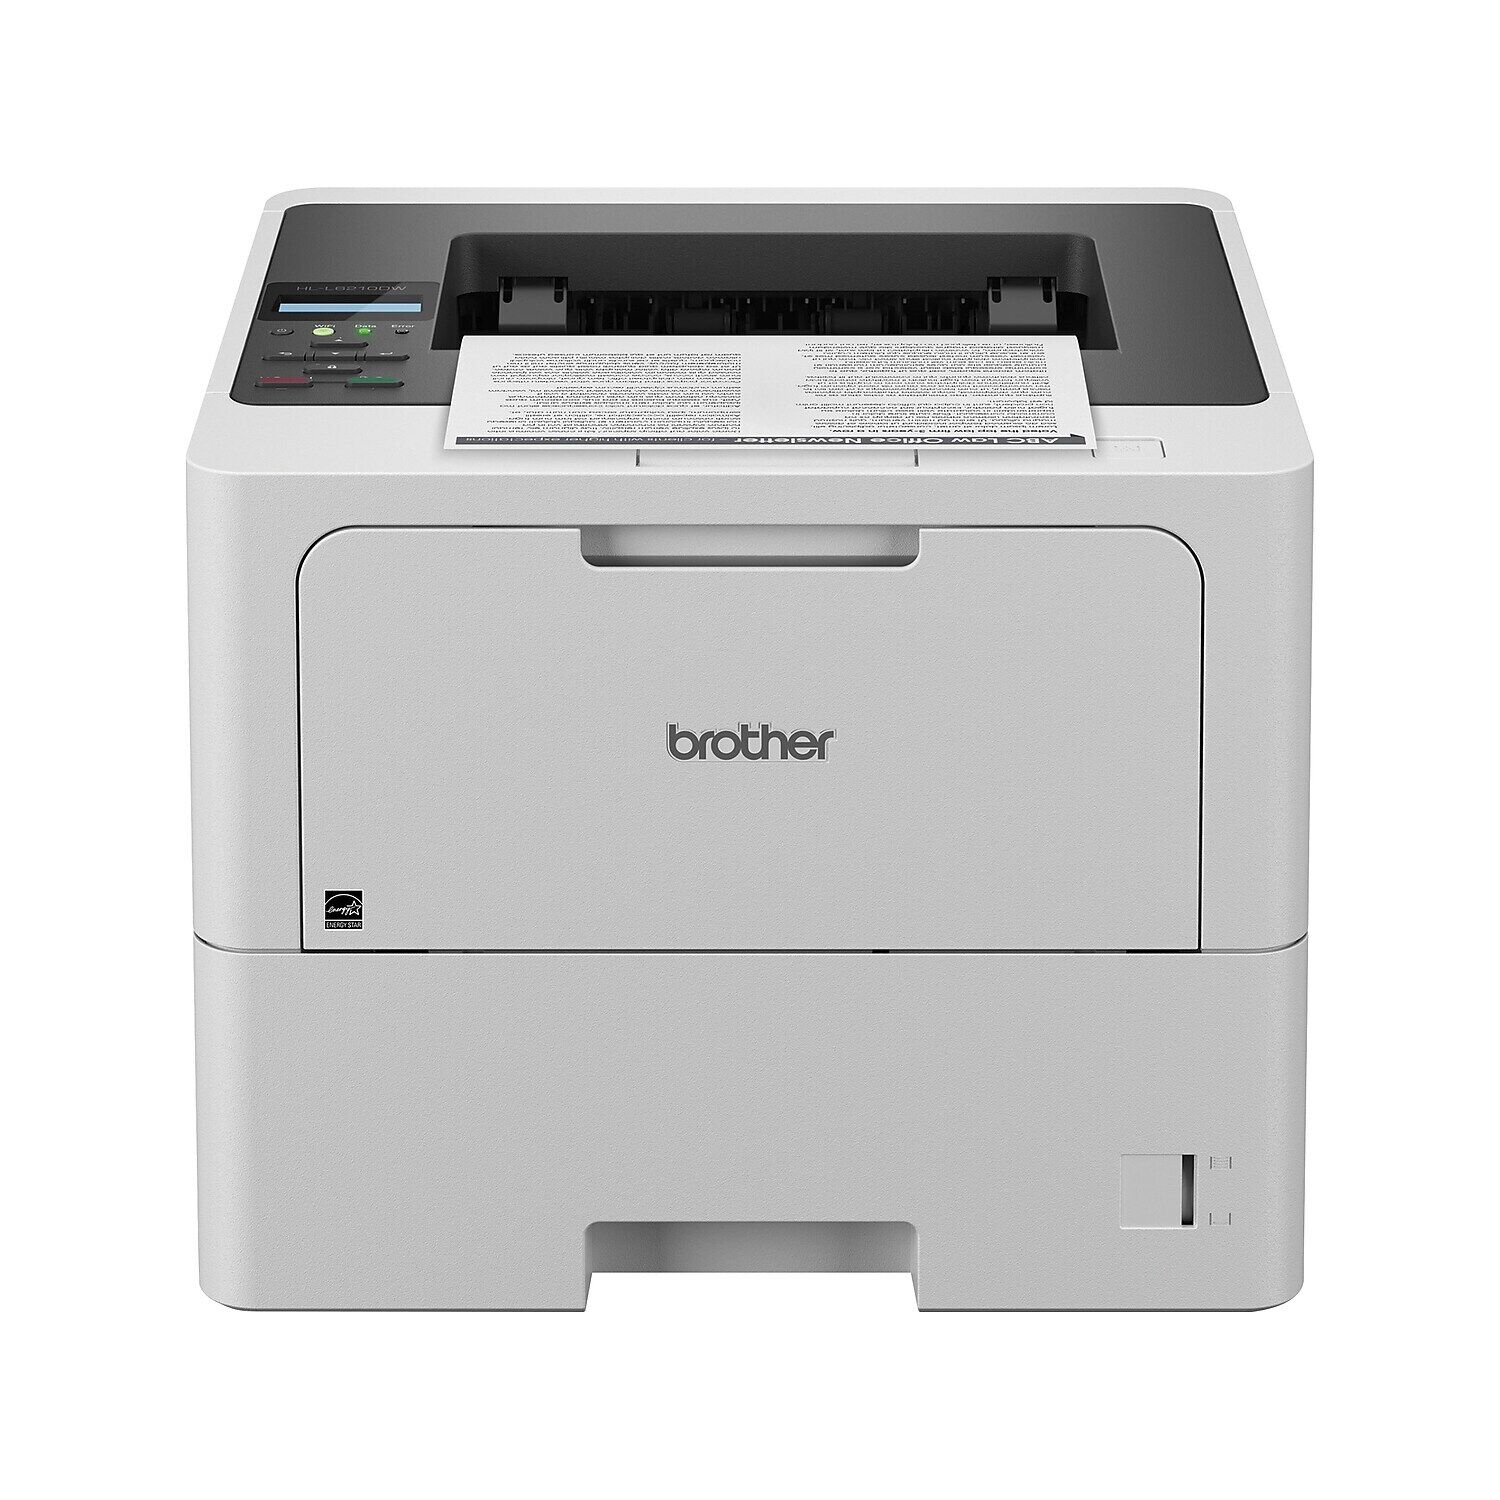 Brother Business Monochrome Laser Printer Large Paper Capacity Wireless